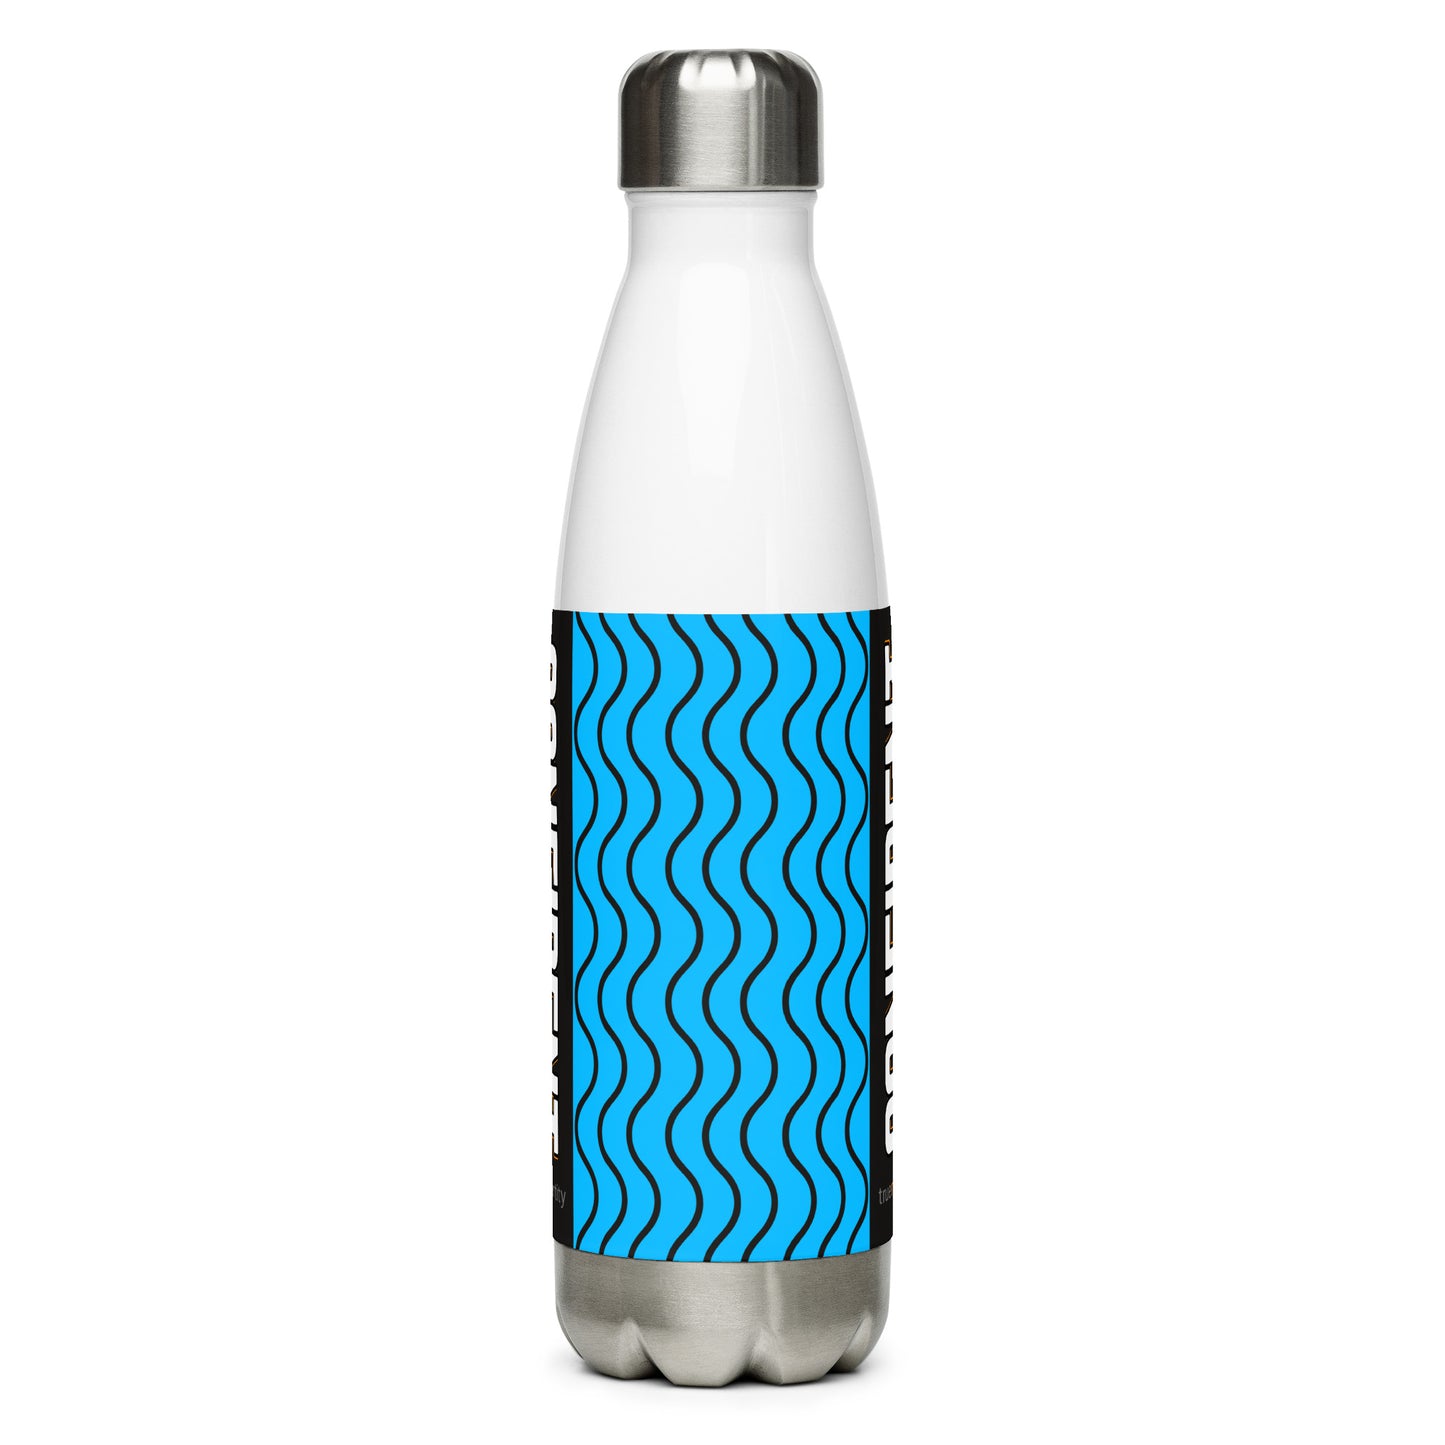 CONFIDENT Stainless Steel Water Bottle Blue Wave Design, 17 oz, in Black or White